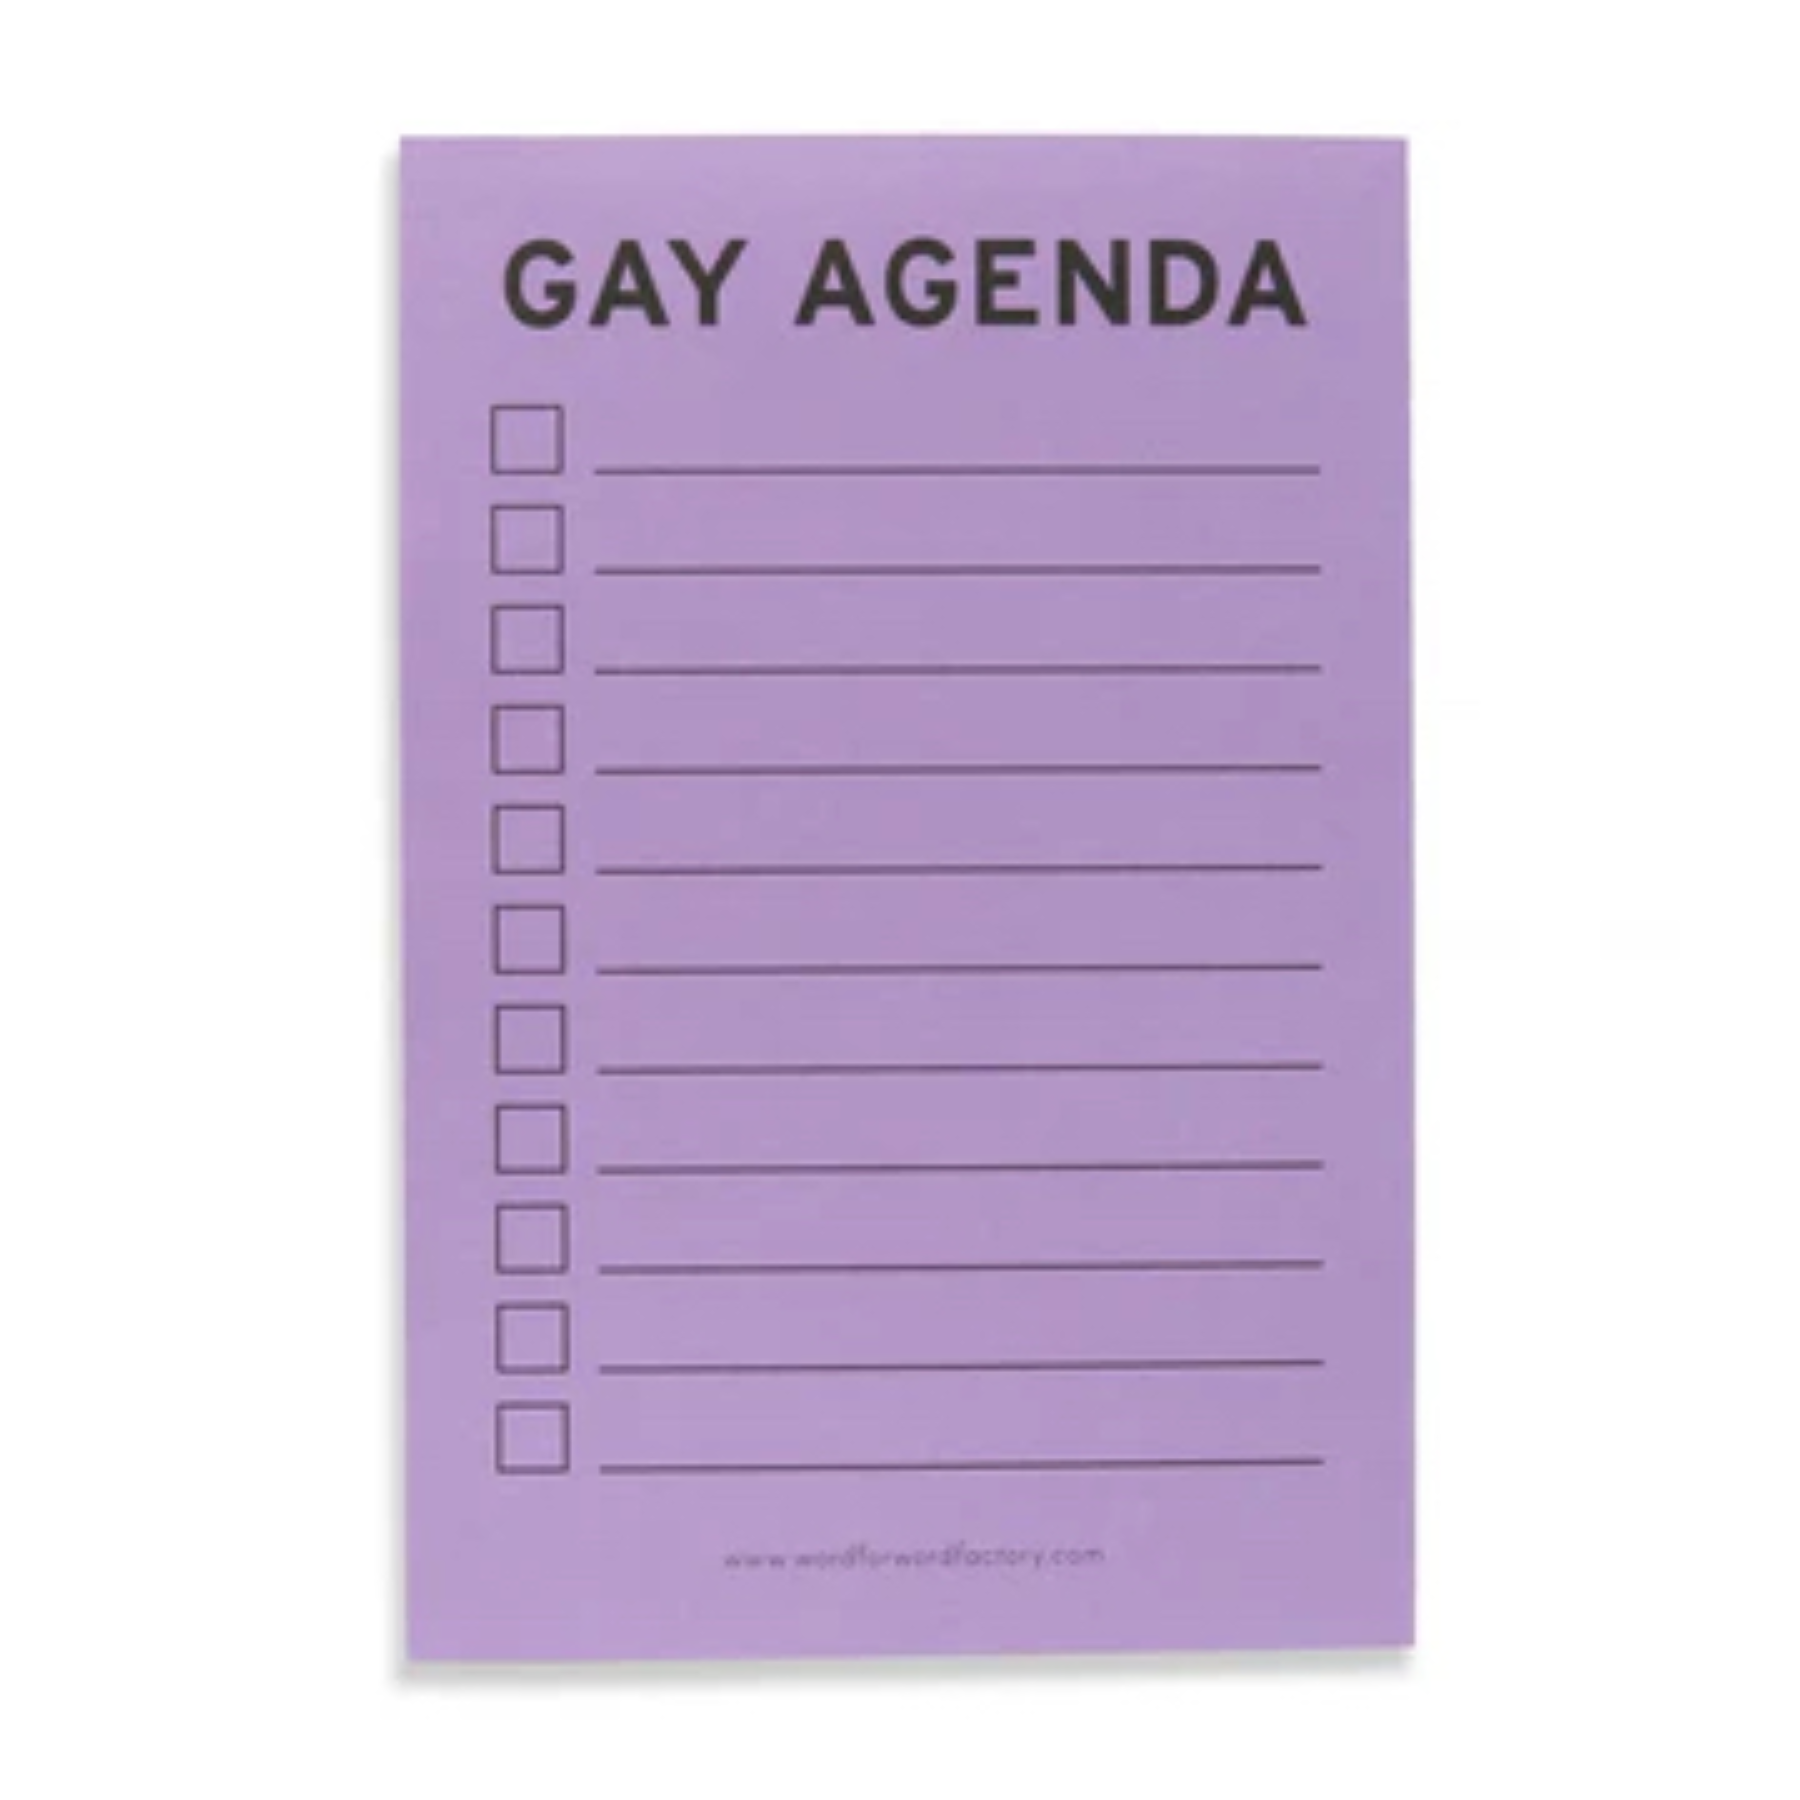 GAY AGENDA LIST PAD by WORD FOR WORD